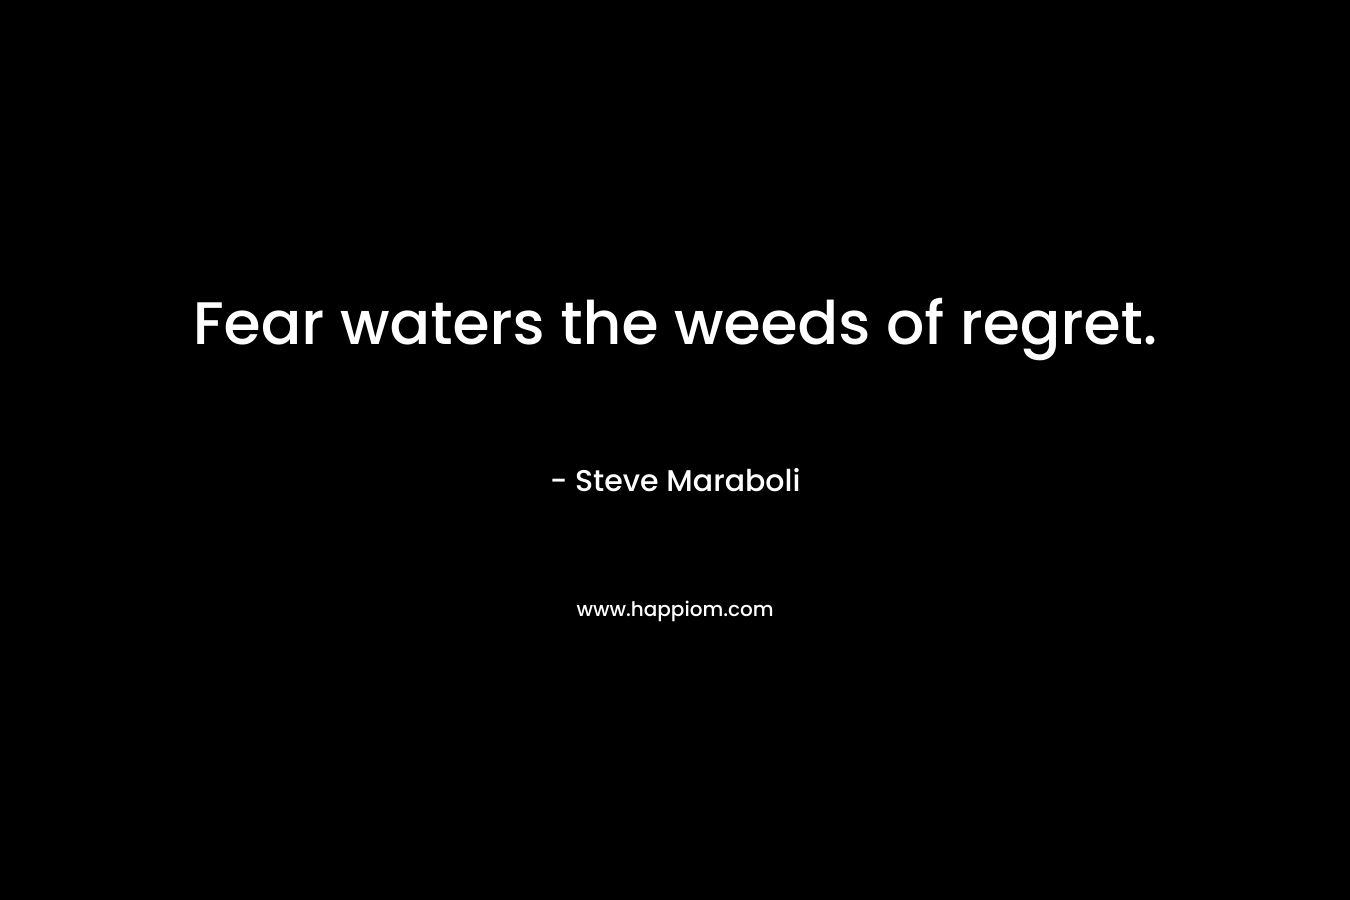 Fear waters the weeds of regret.